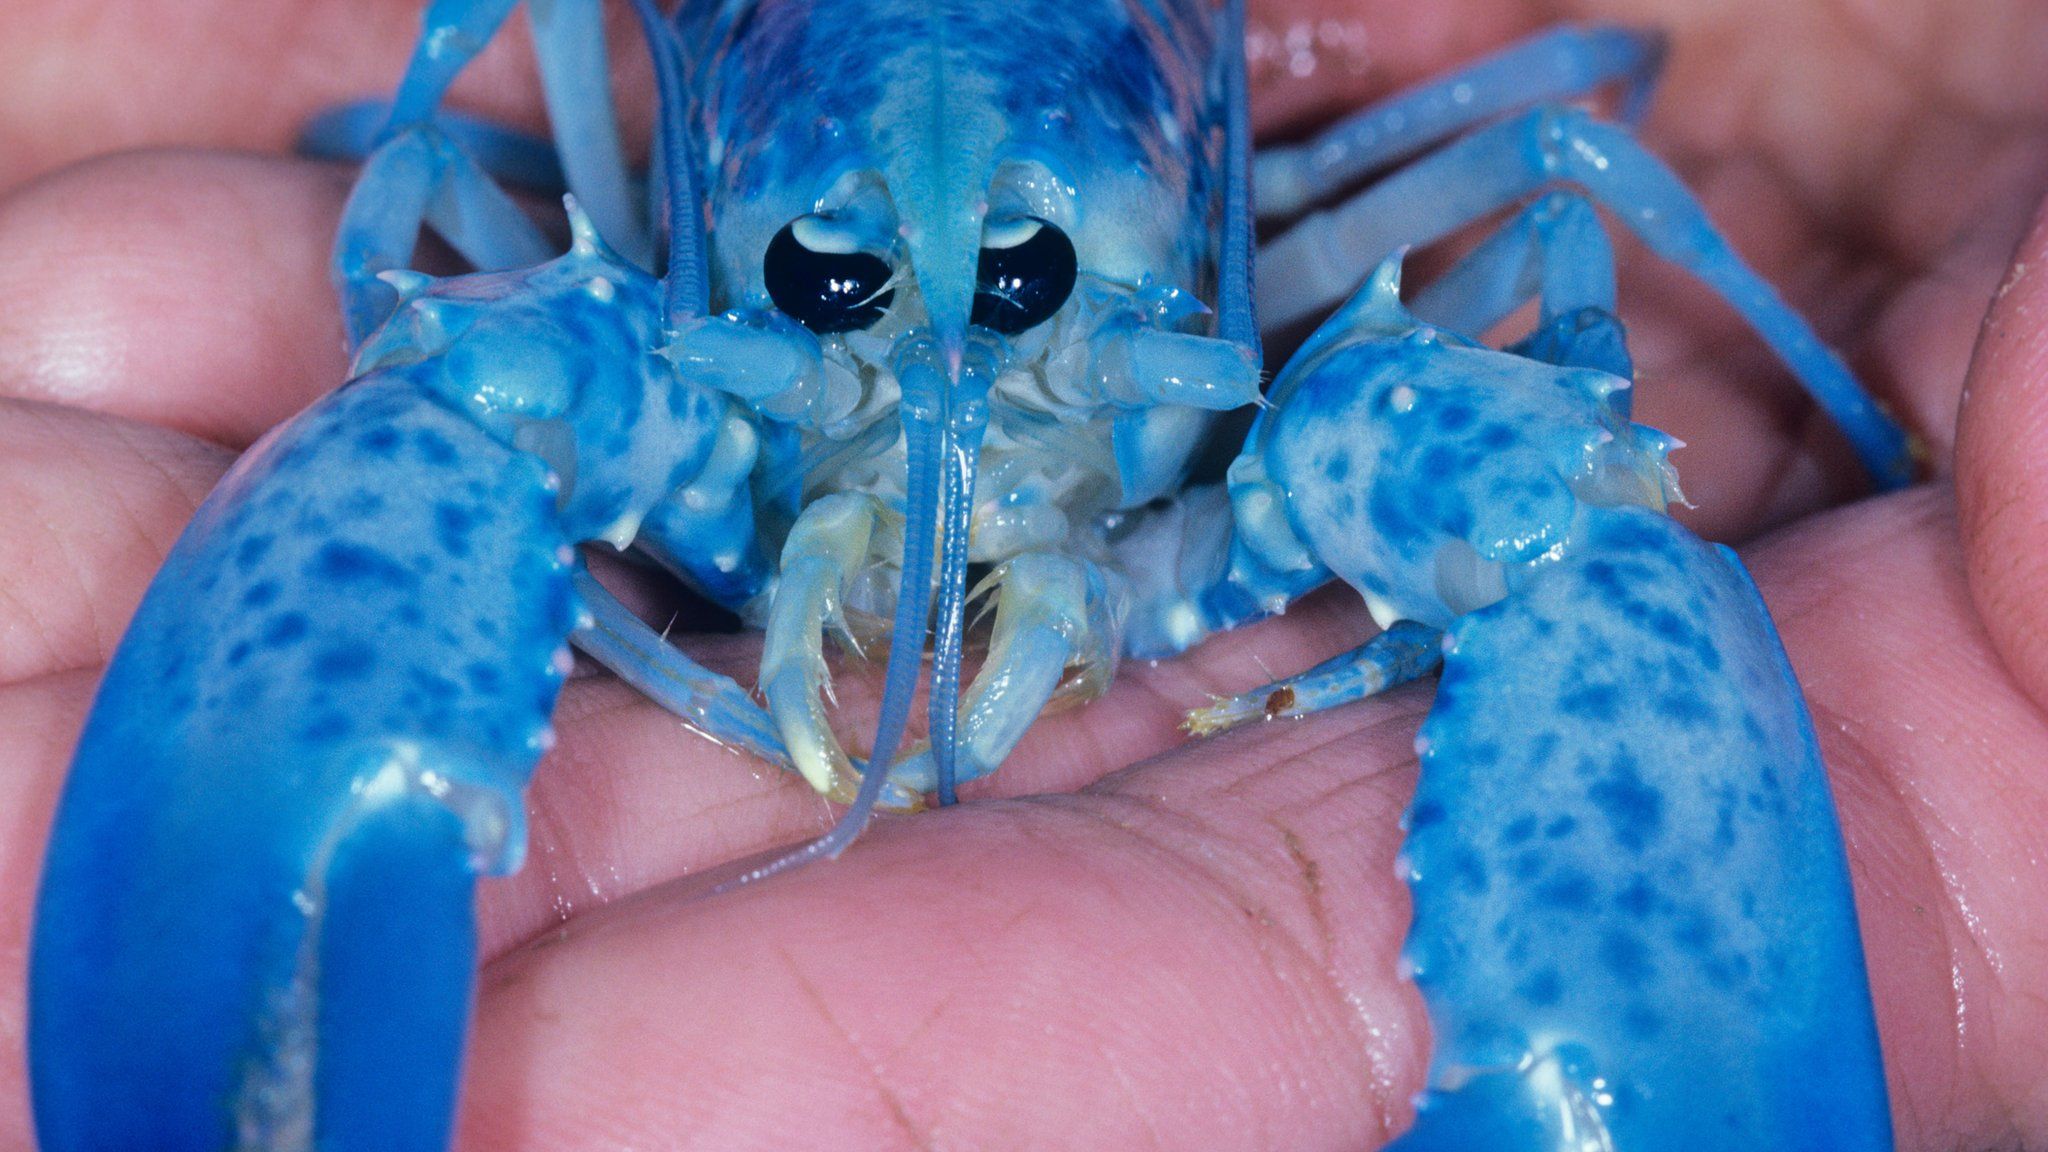 Rare blue lobster found in Plymouth Sound - BBC News